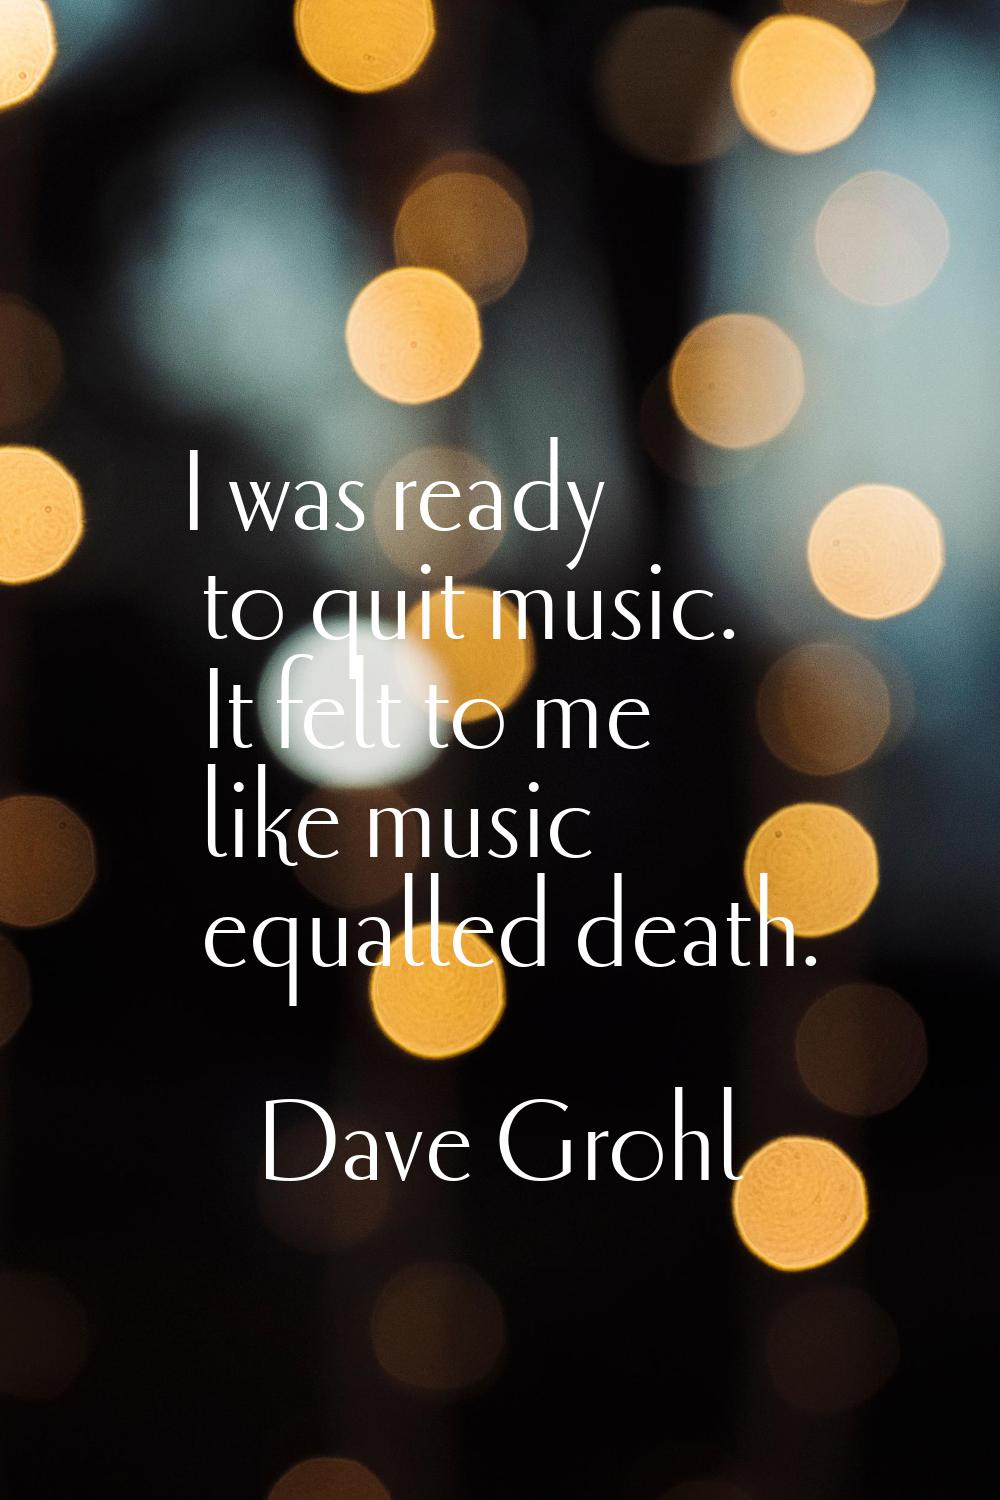 I was ready to quit music. It felt to me like music equalled death.